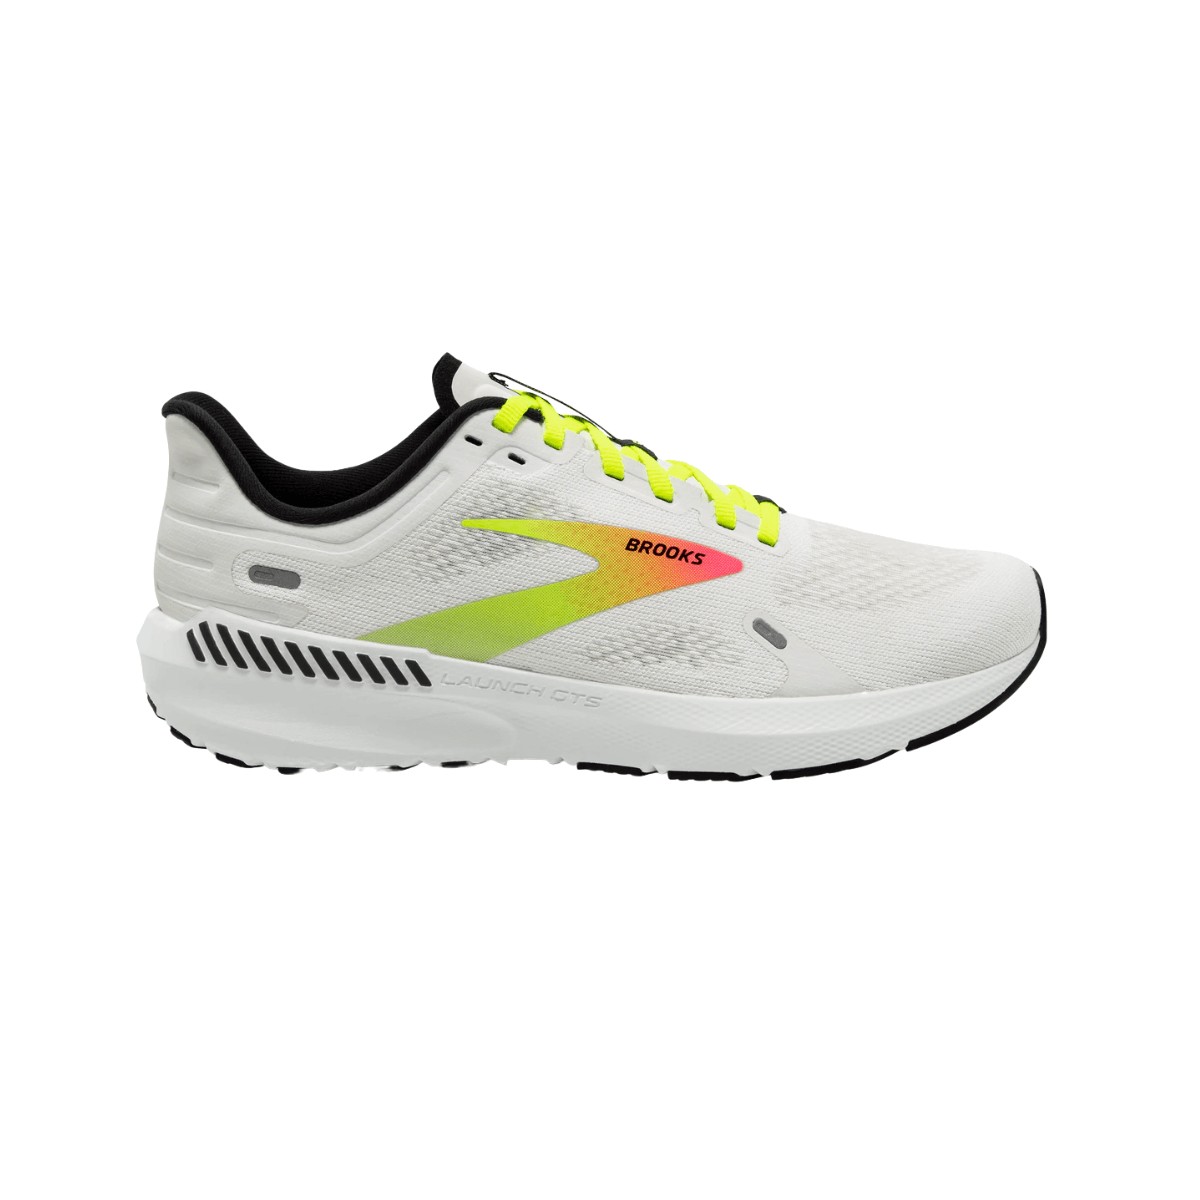 Brooks Launch GTS 9 White Pink Green AW22 Shoes, Size 43 - EUR